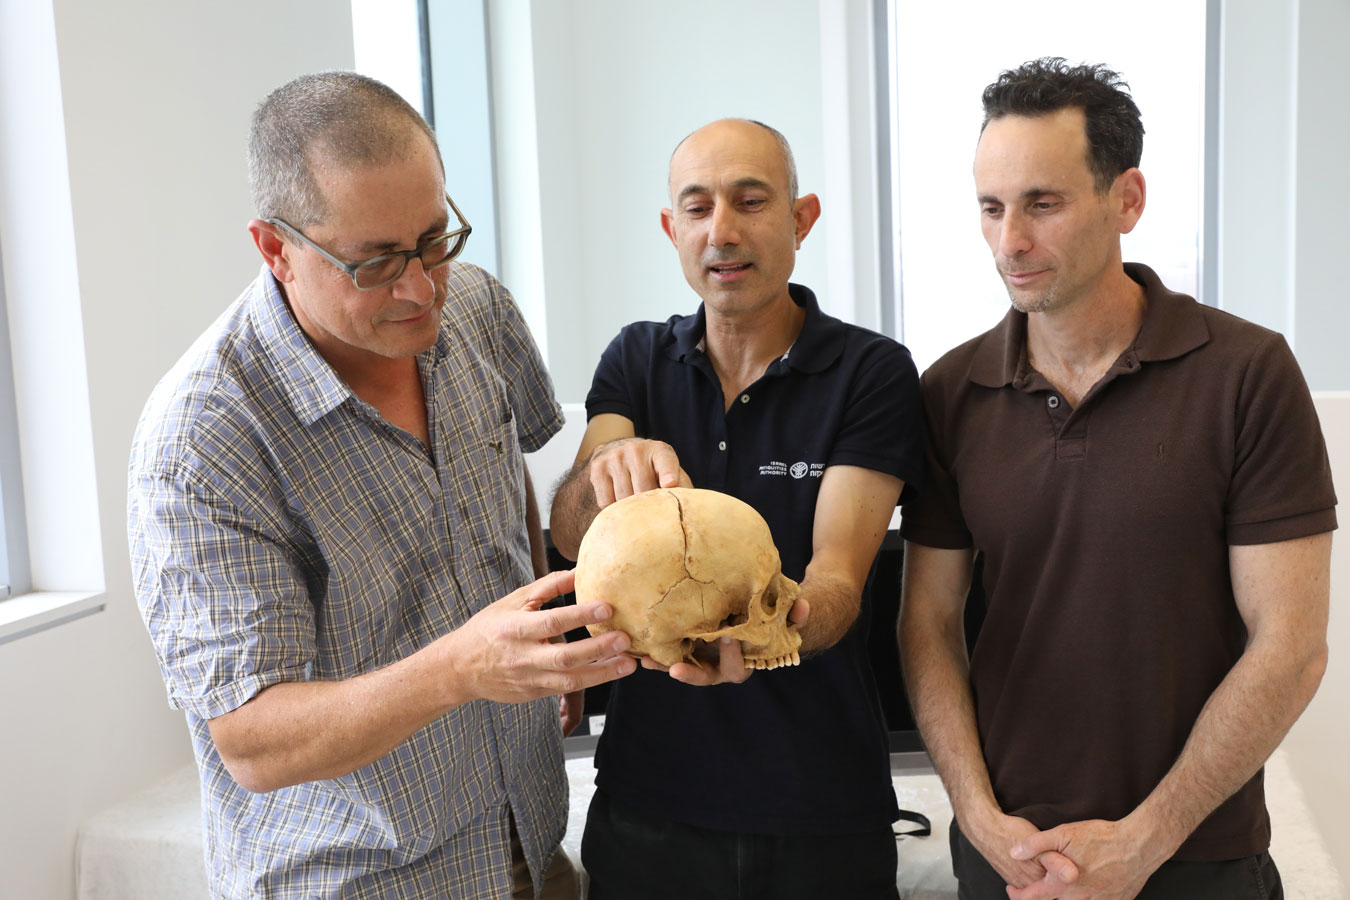 Professor Boaz Zisu, Dr. Nagar and Dr. Cohen with the fractured skull